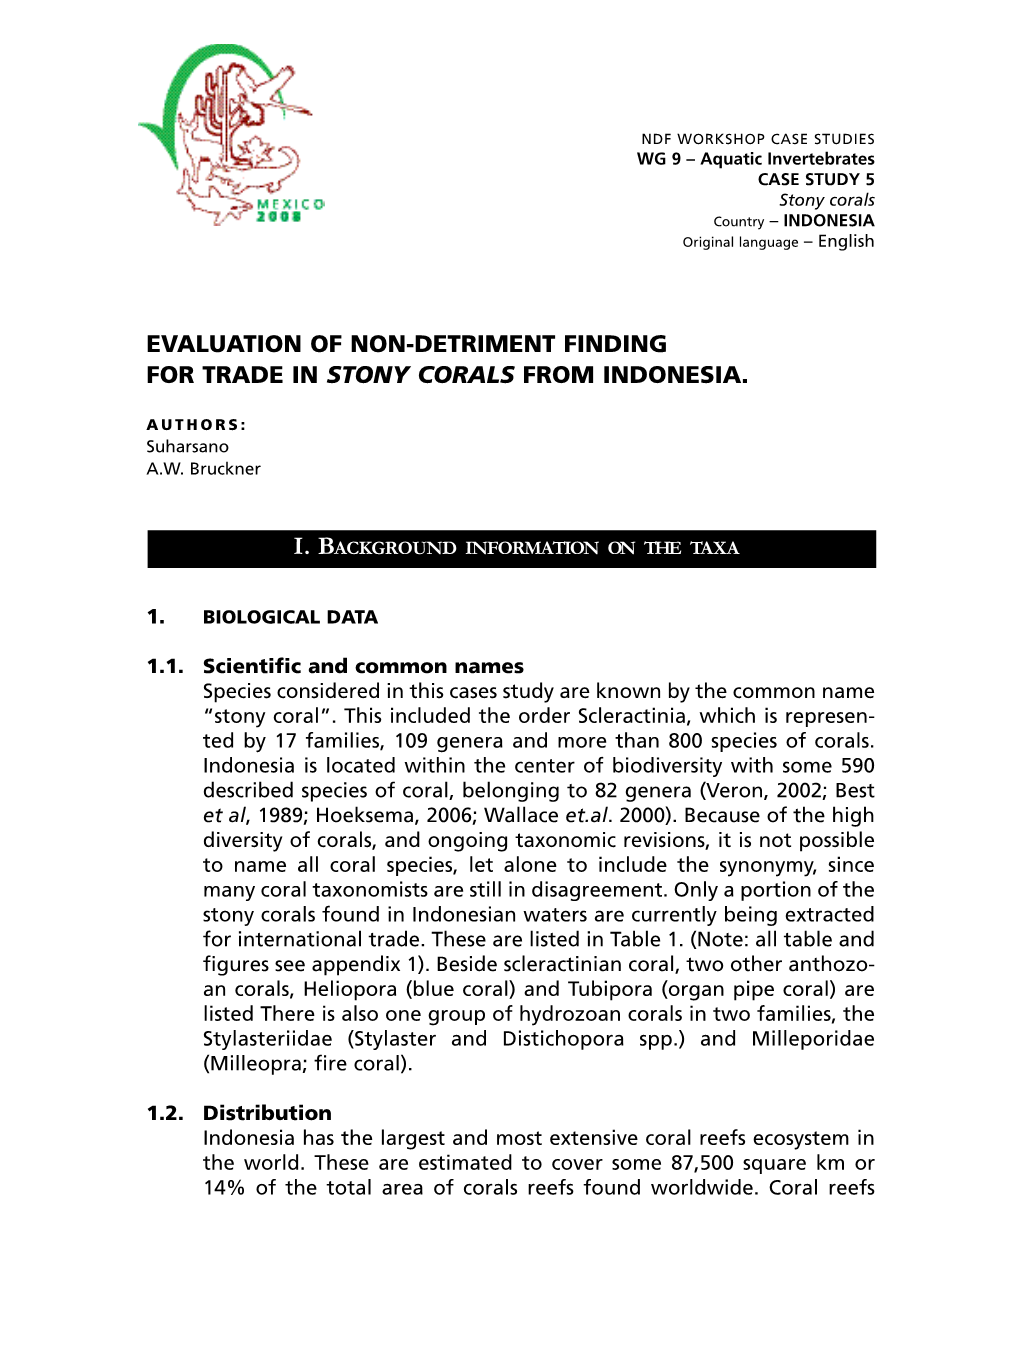 Evaluation of Non-Detriment Finding for Trade in Stony Corals from Indonesia